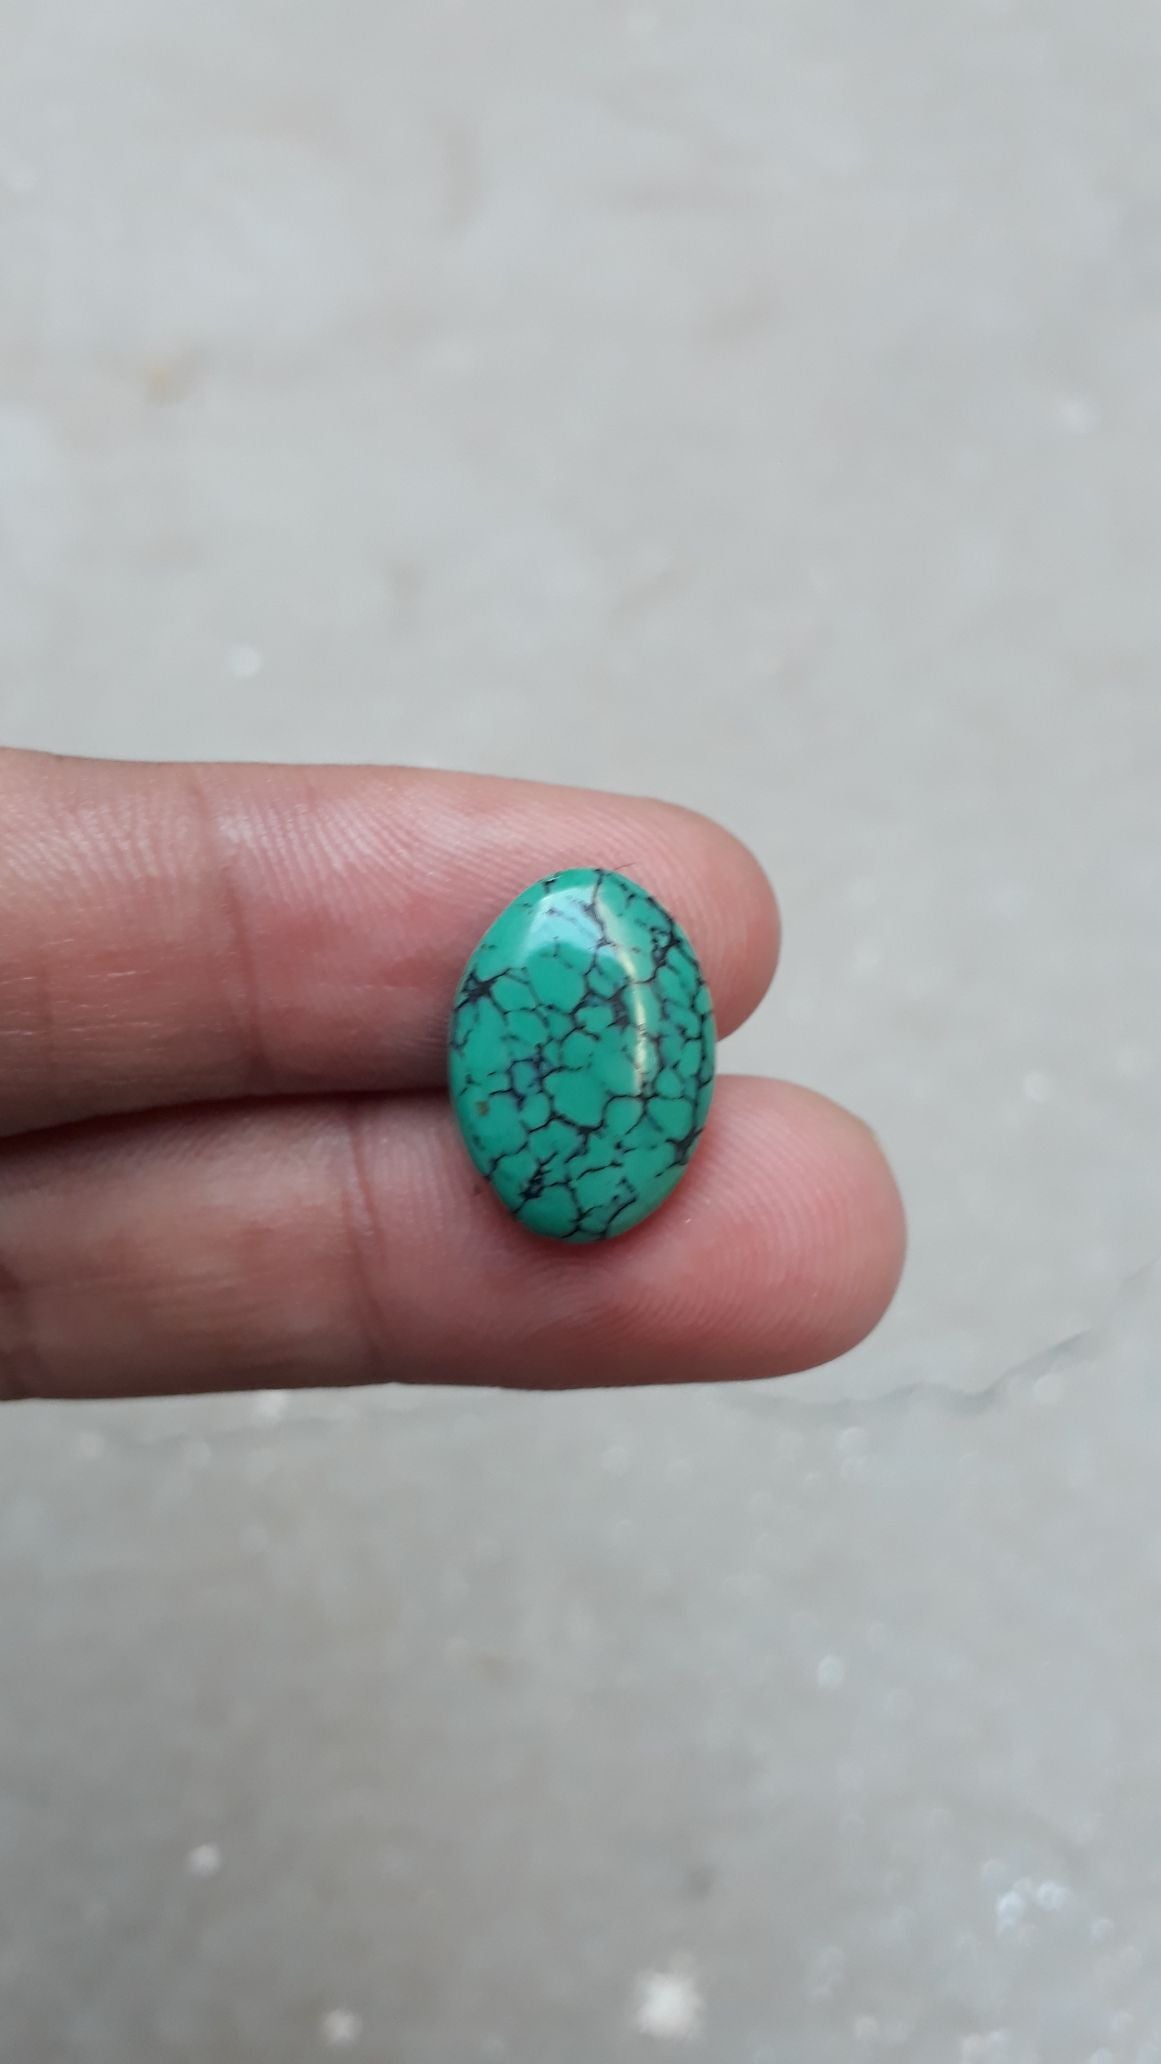 Natural Turquoise with Veins - Green Matrix Turquoise-7.65 Ct-17x12mm